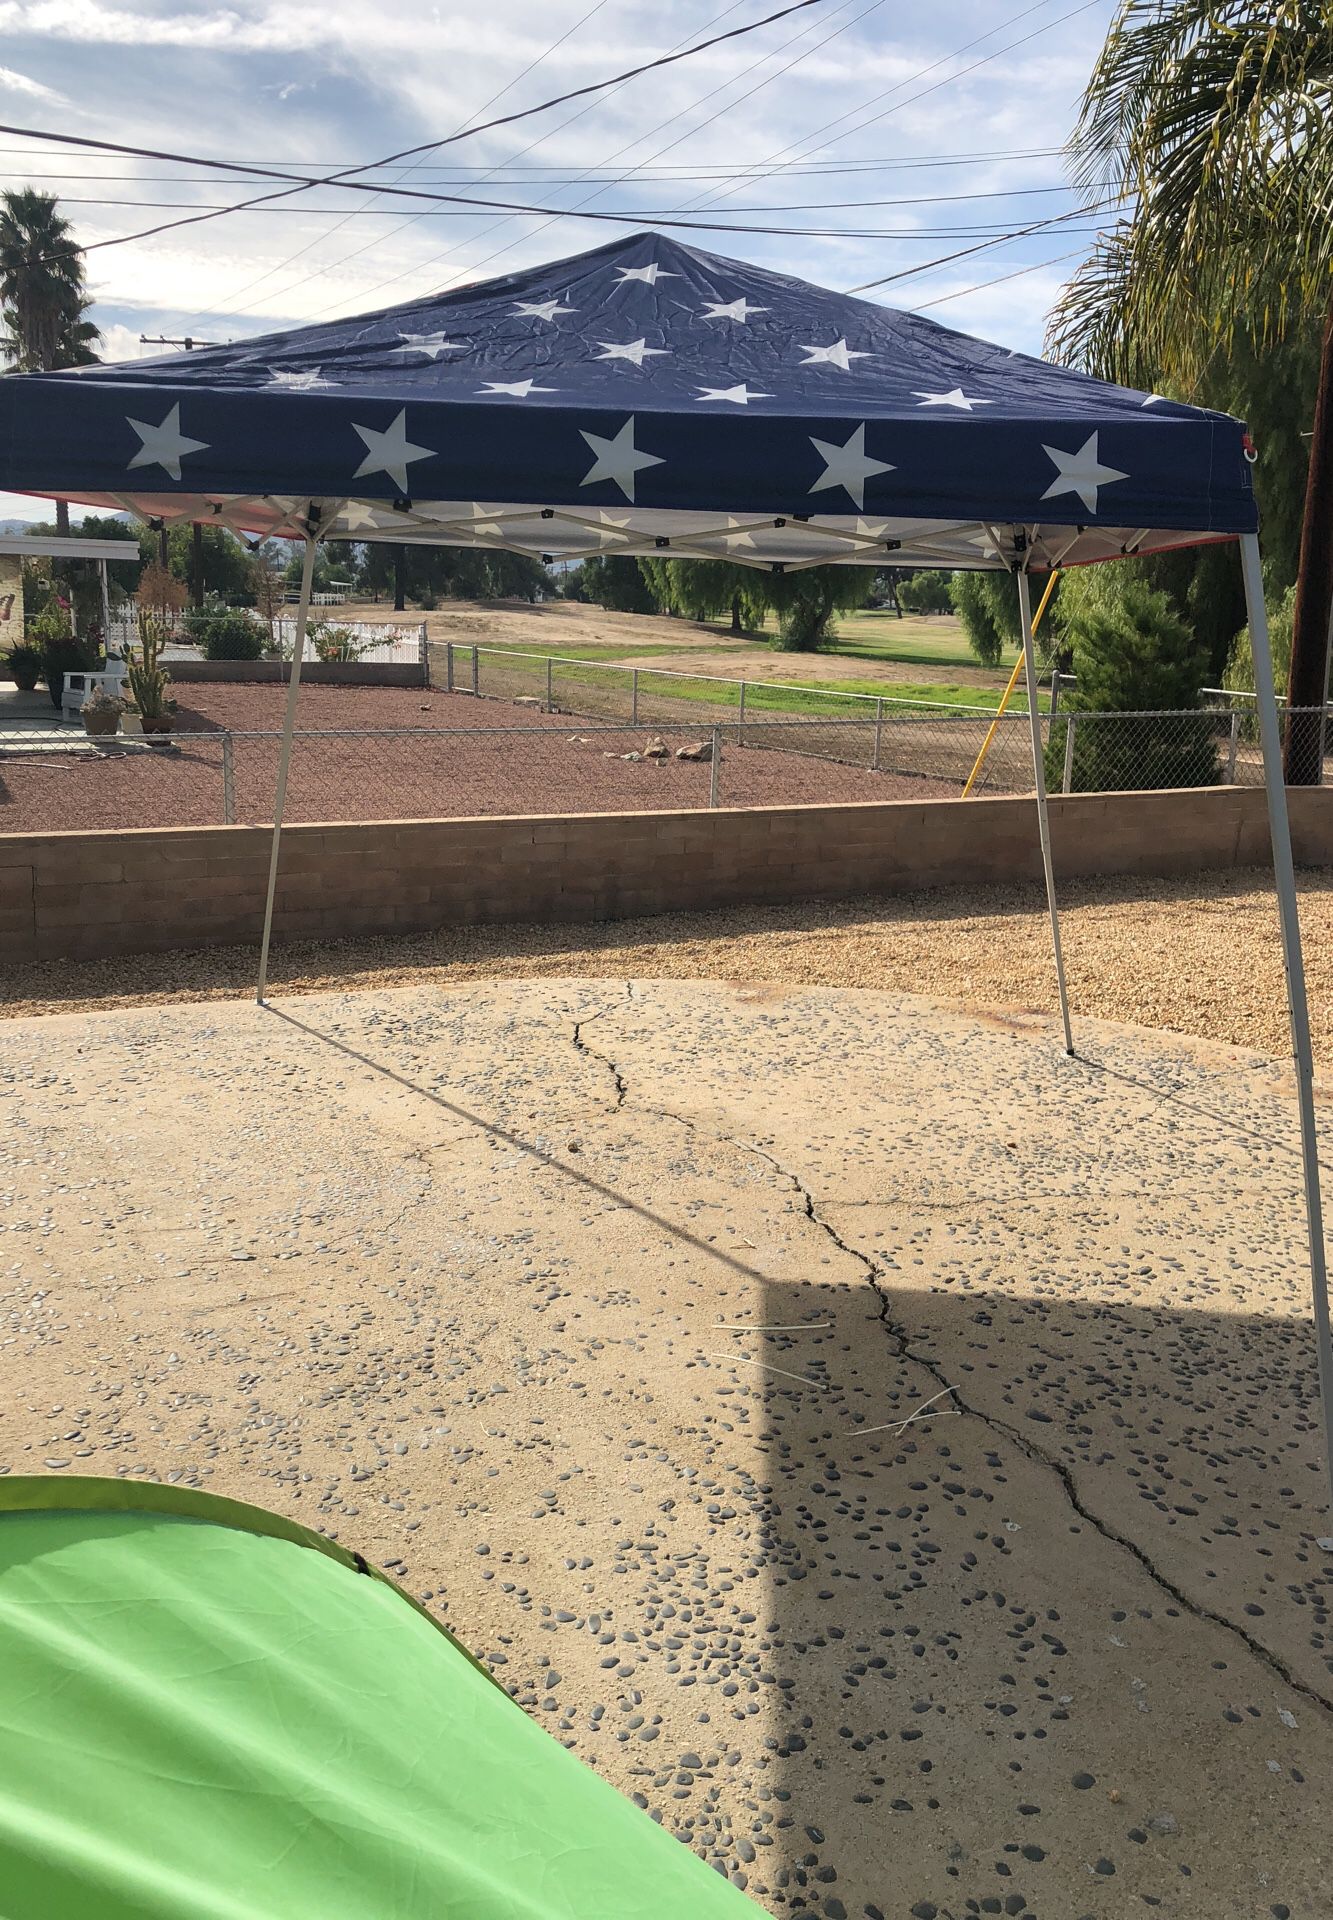 118 x 118 American flag kit canopy tent in perfect condition